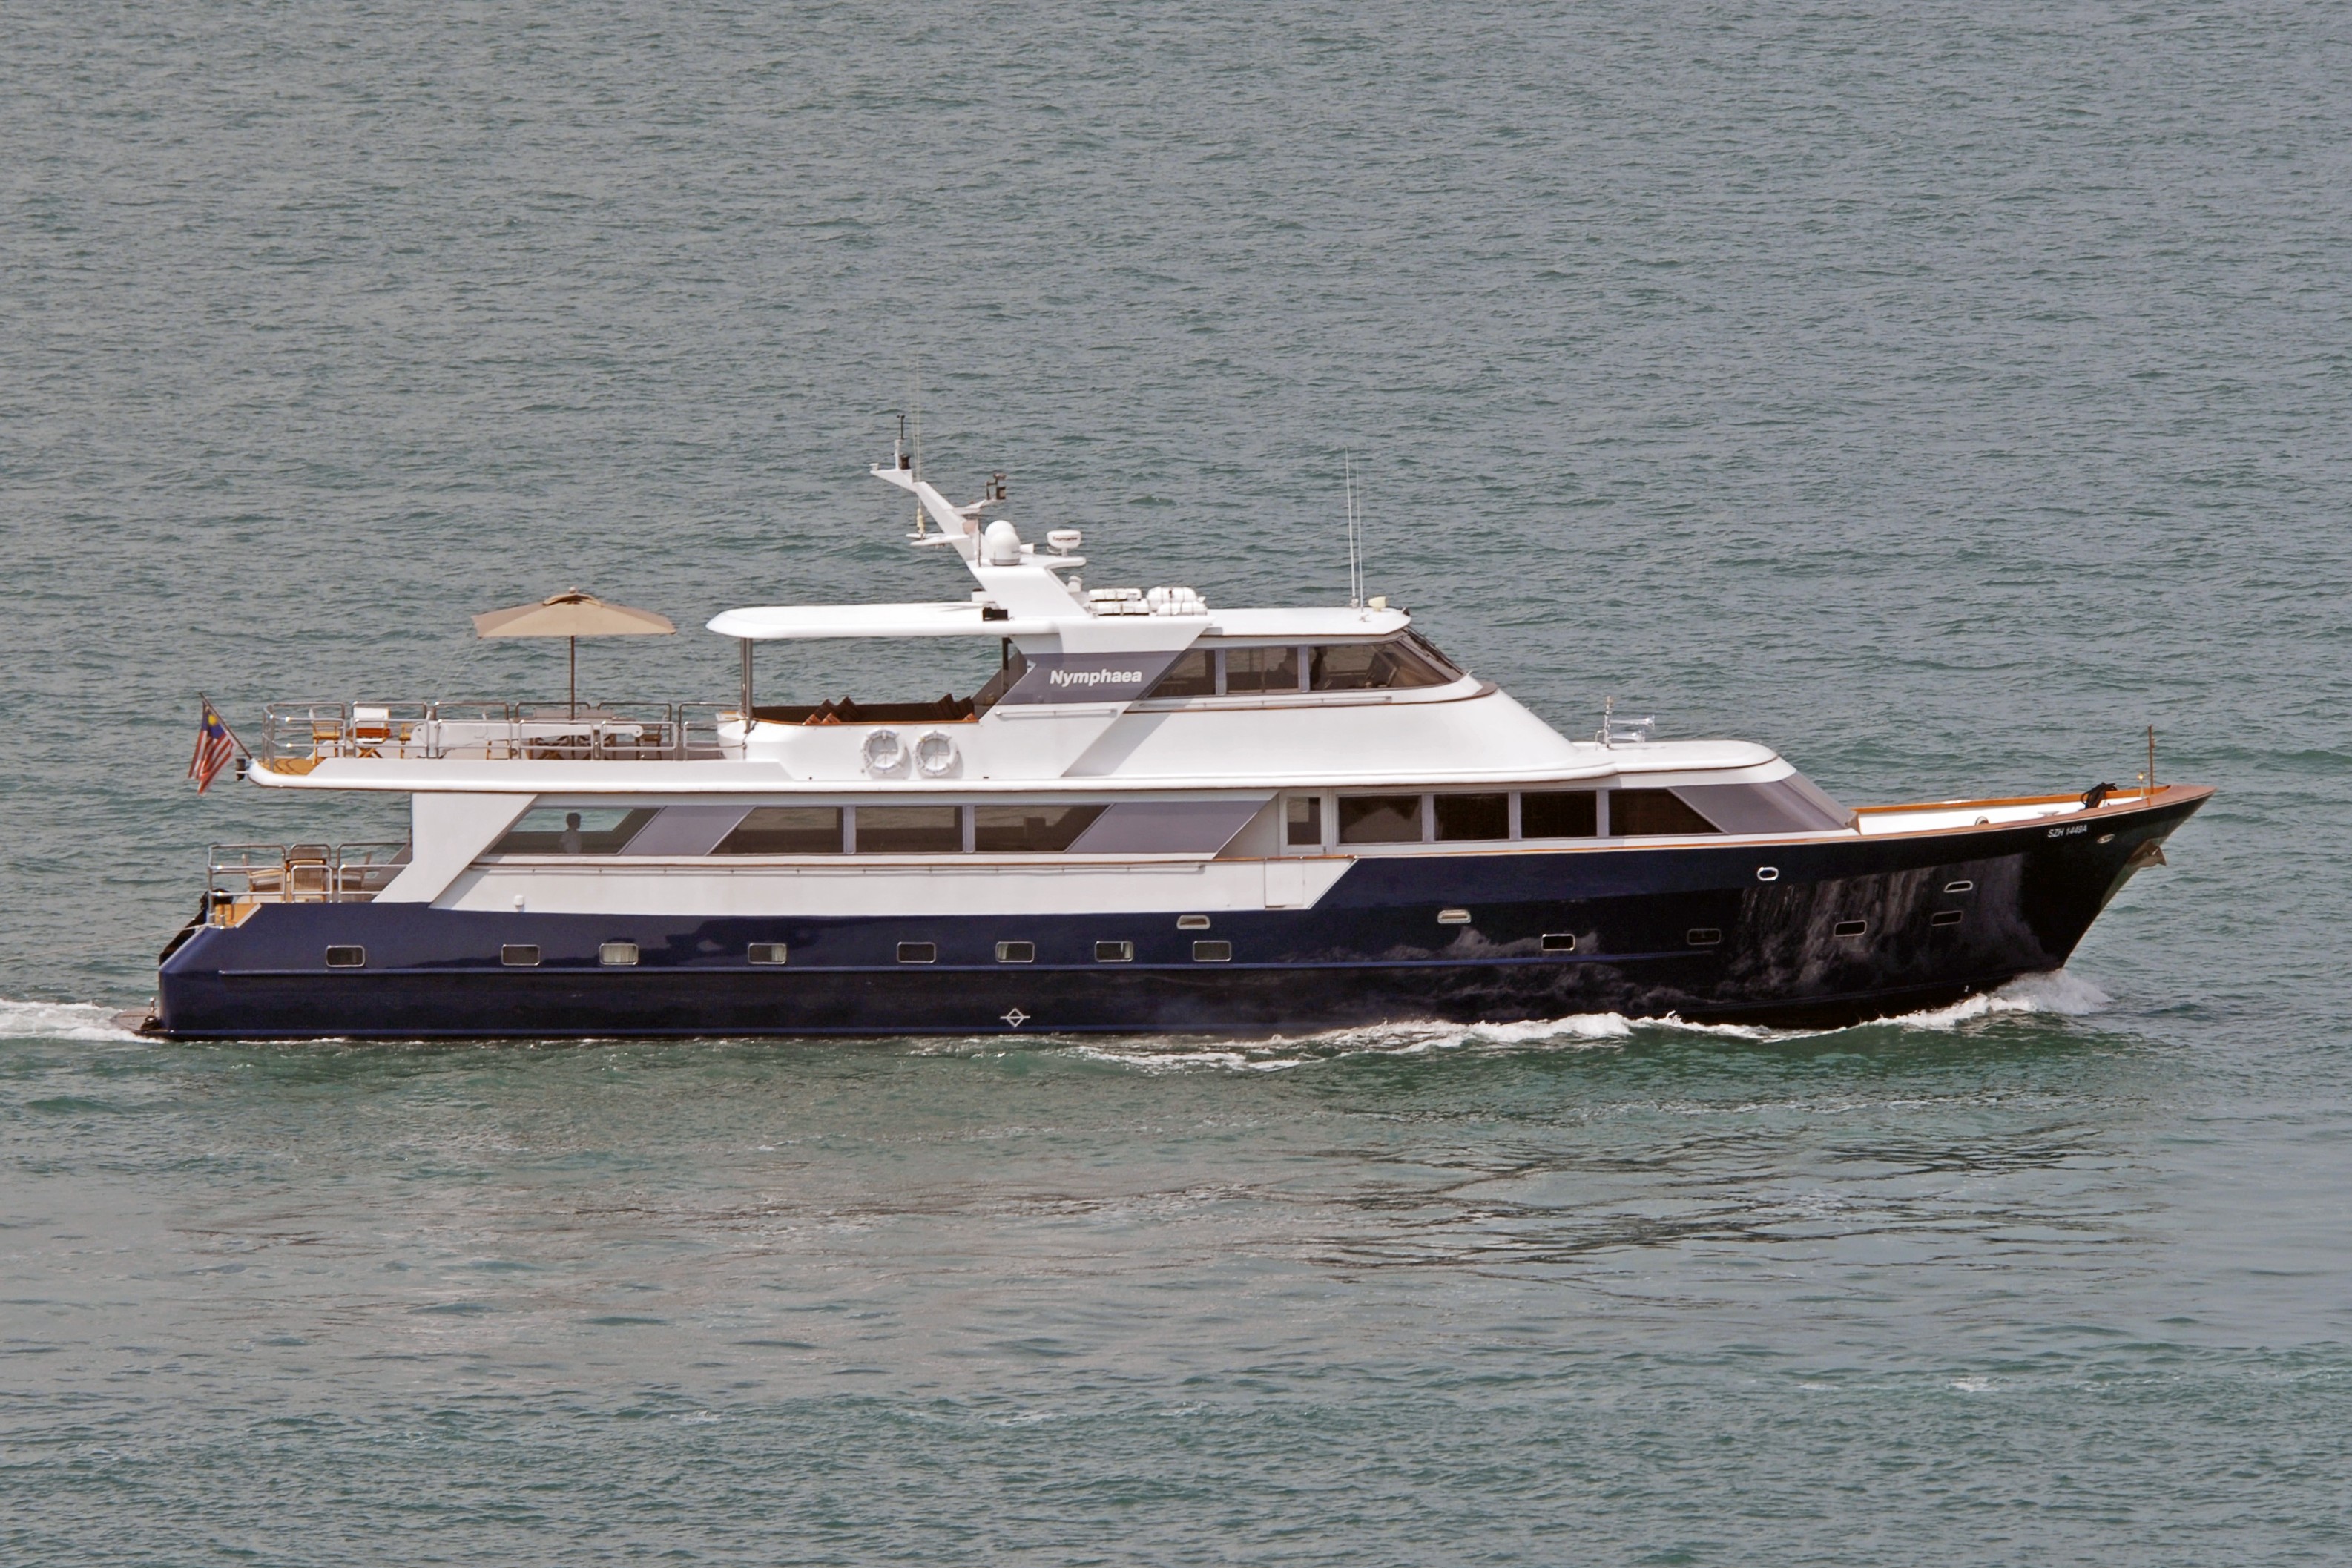 The 33m Yacht NYMPHAEA